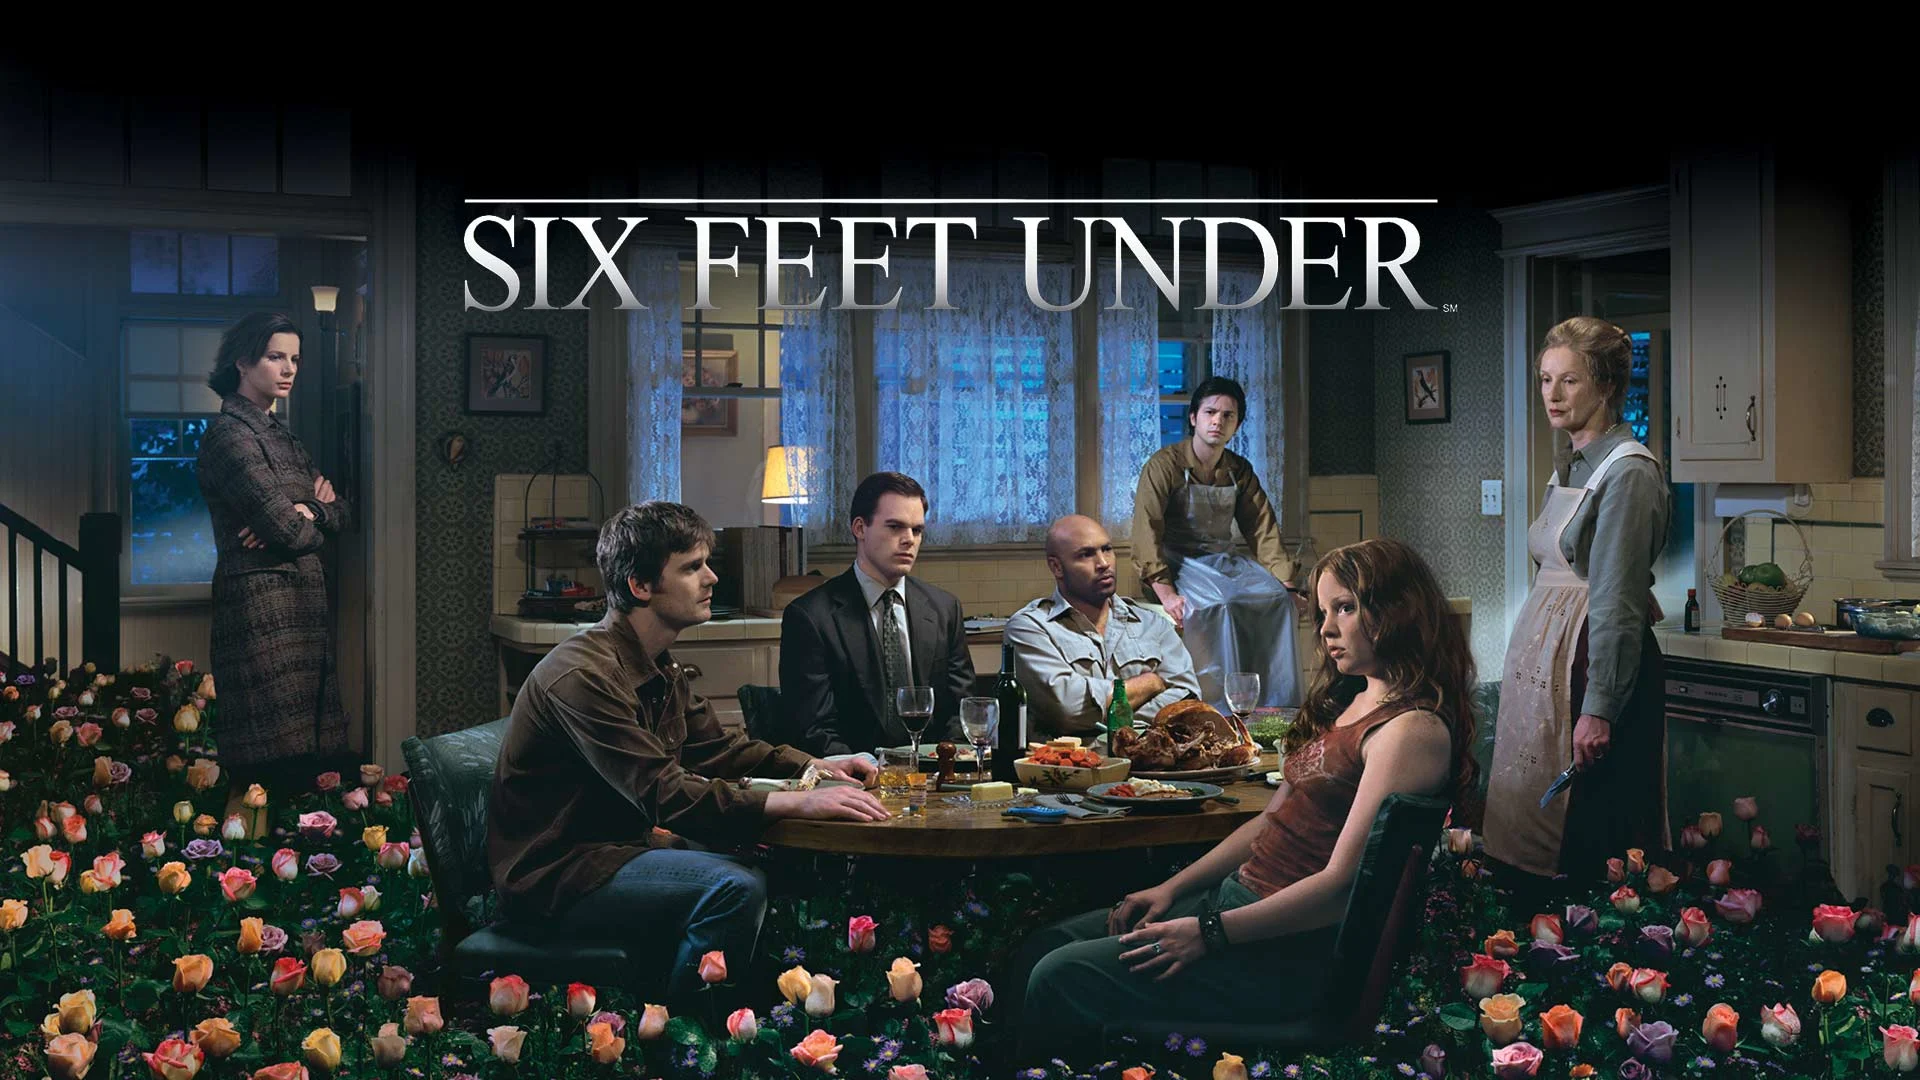 Six Feet Under - 5 Shows Like From Scratch